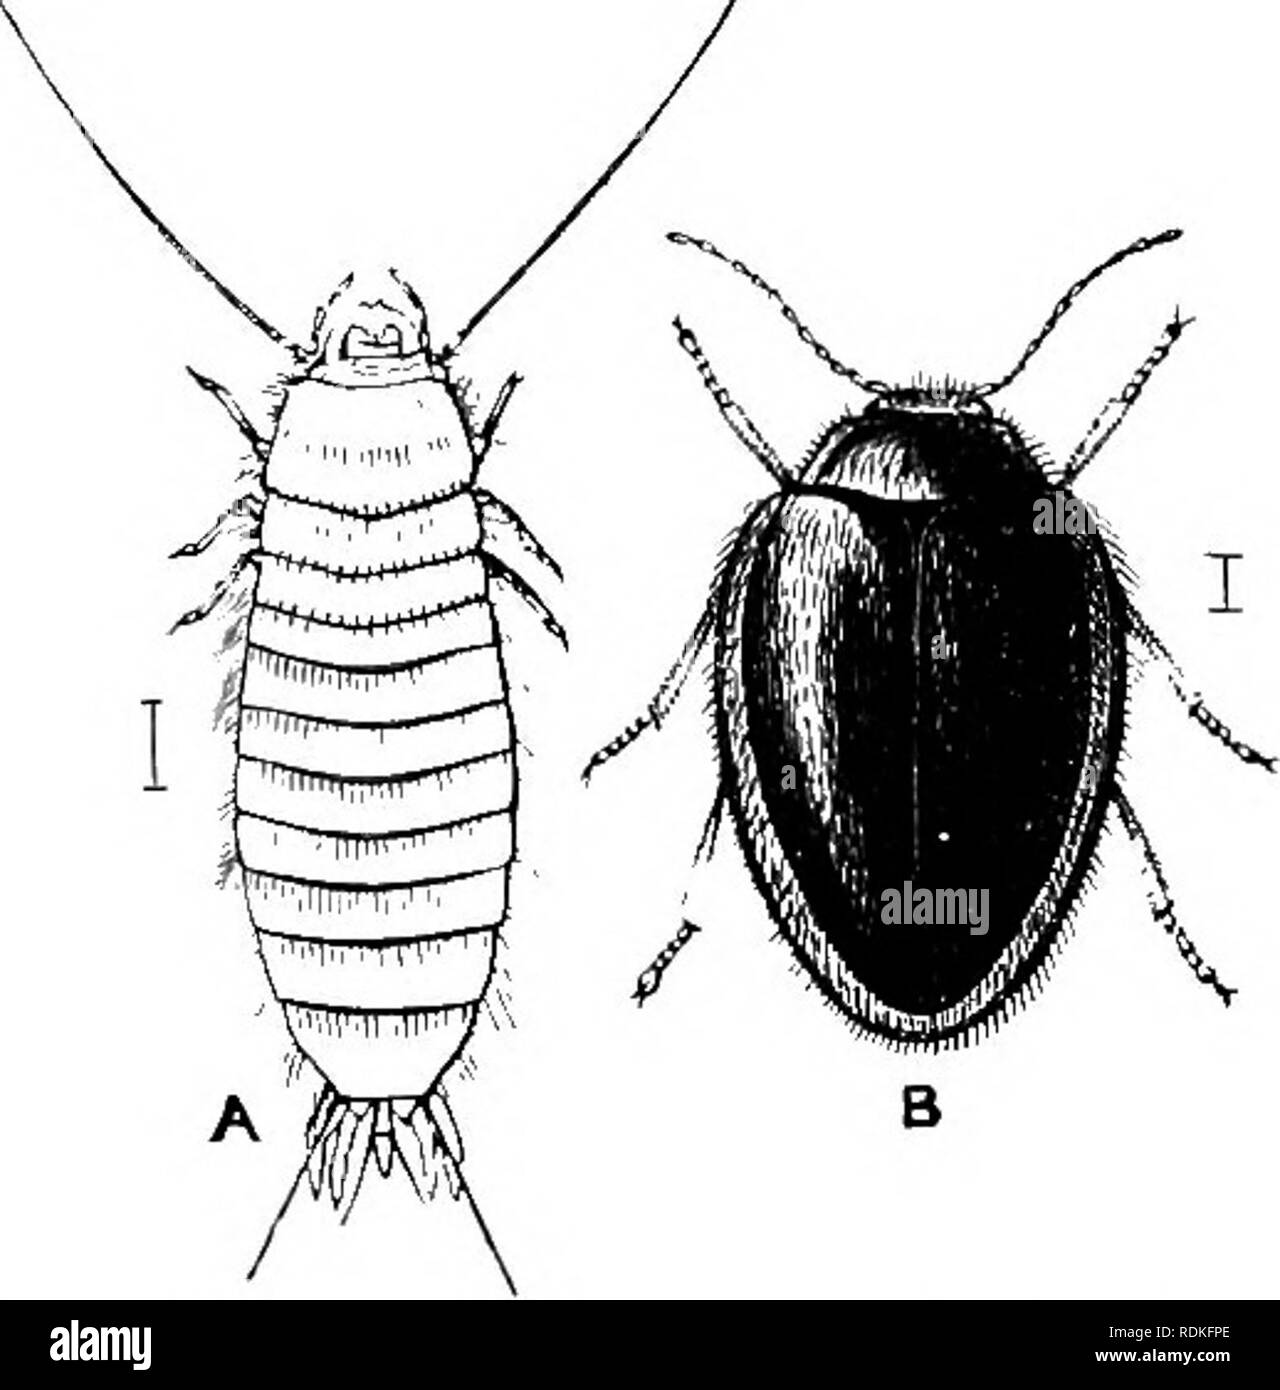 . The Cambridge natural history. Zoology. POLYMORPHA DASCILLIDAE 255 Coleoptera, the body being elongate and vermiform, the elytra reduced to small, functionless appendages, while the wings are ample, not folded, but traversed by strong longitudinal nervures, and with only one or two transverse nervures. Owing to the destruction of our forests the two British Lymexylonidae—L. navale and Hylecoetus dermestoides—are now very rarely met with. Fam. 58. Dascillidae.—Smcdl or moderate-sized beetles, with rather Jiimsy integuments, antennae either serrate, filiform, or cren made flabellate hy long ap Stock Photo